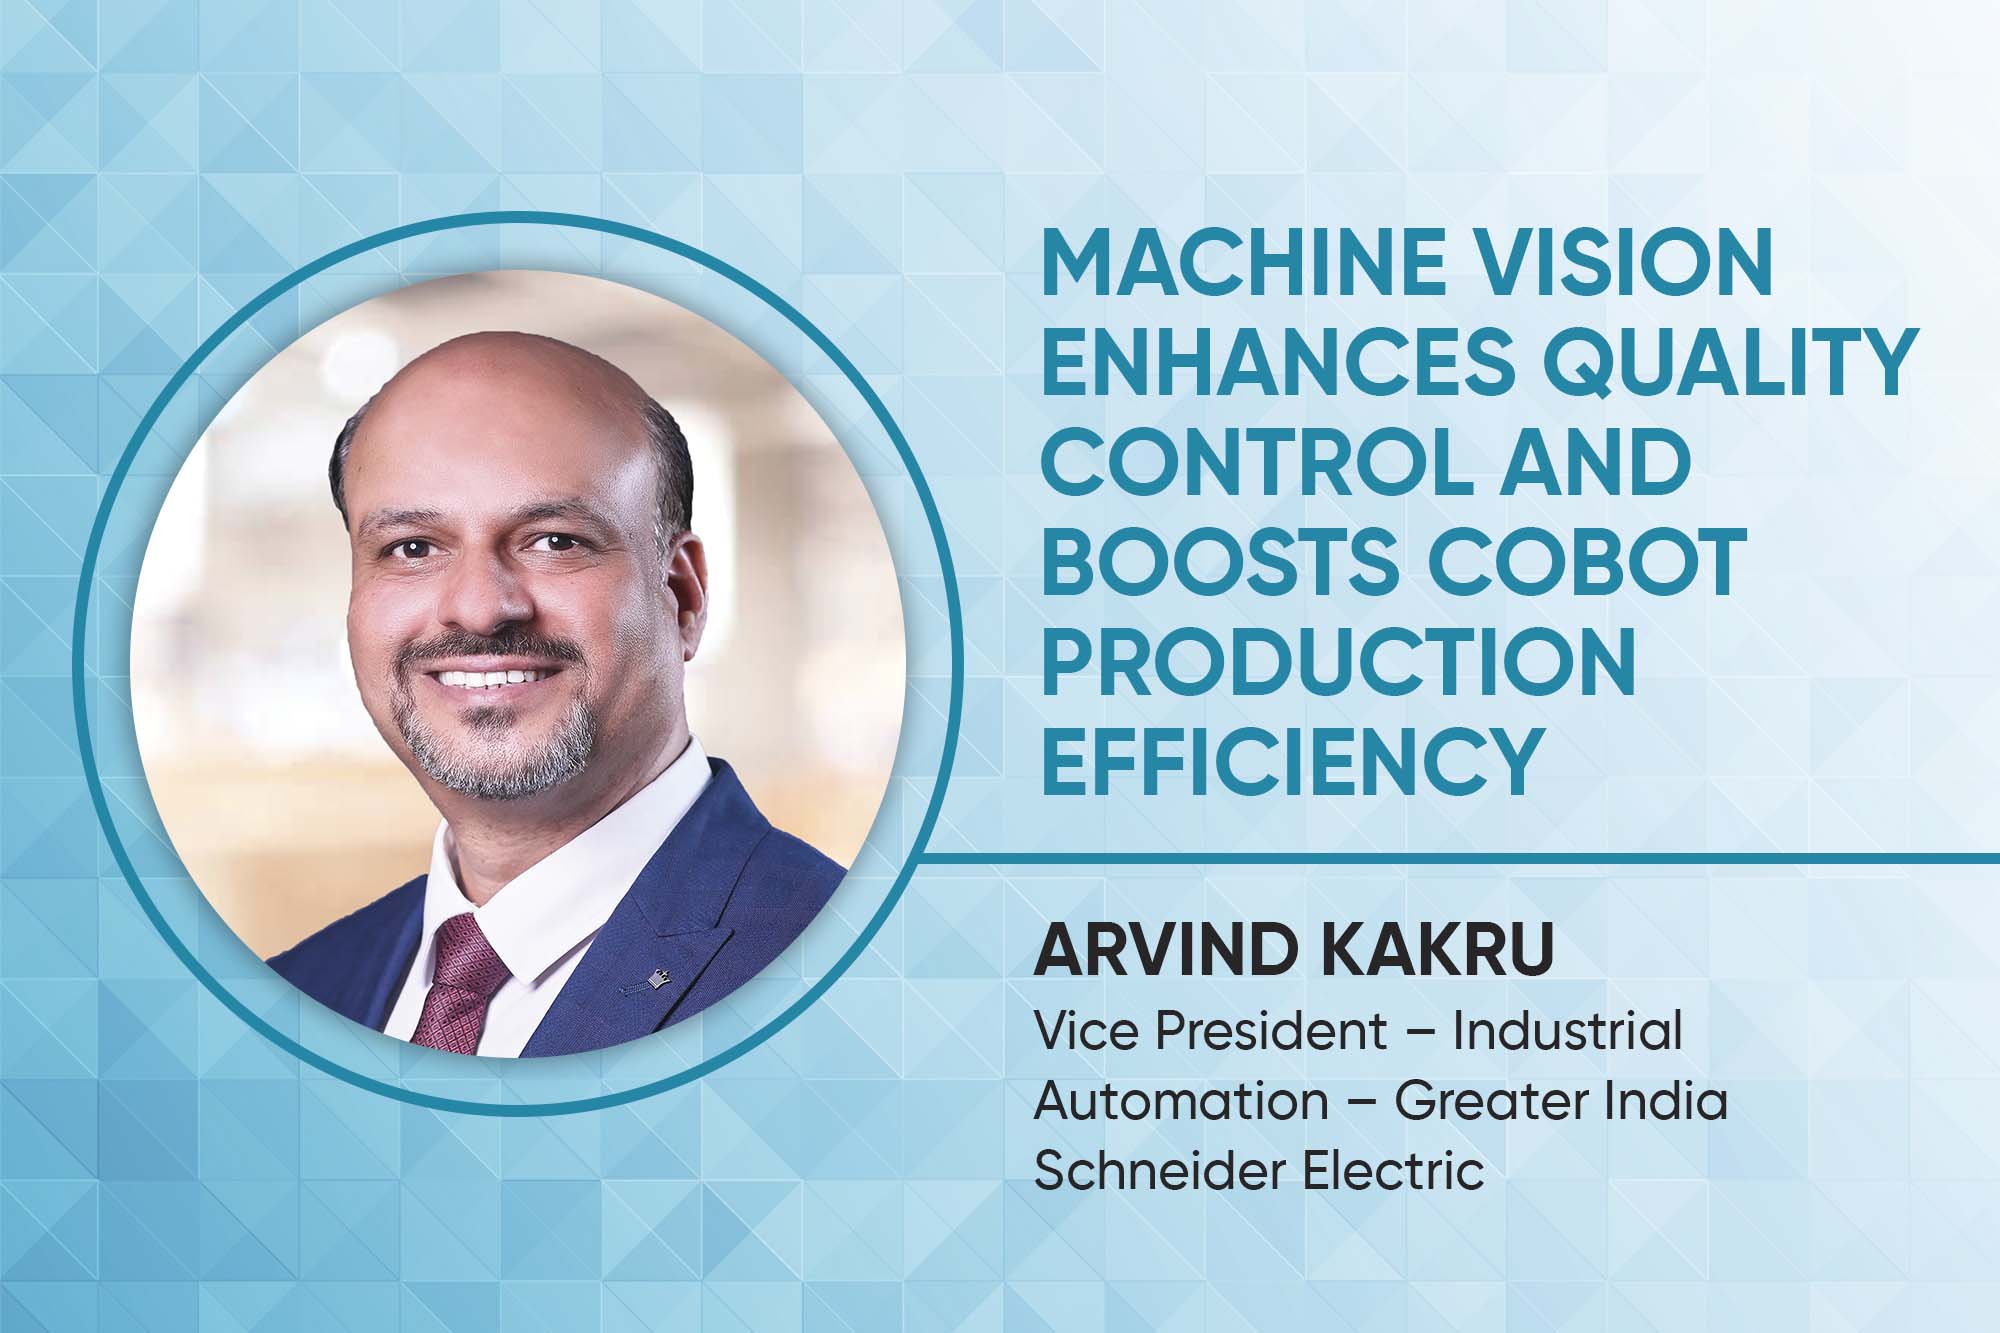 Machine vision enhances quality control and boosts cobot production efficiency